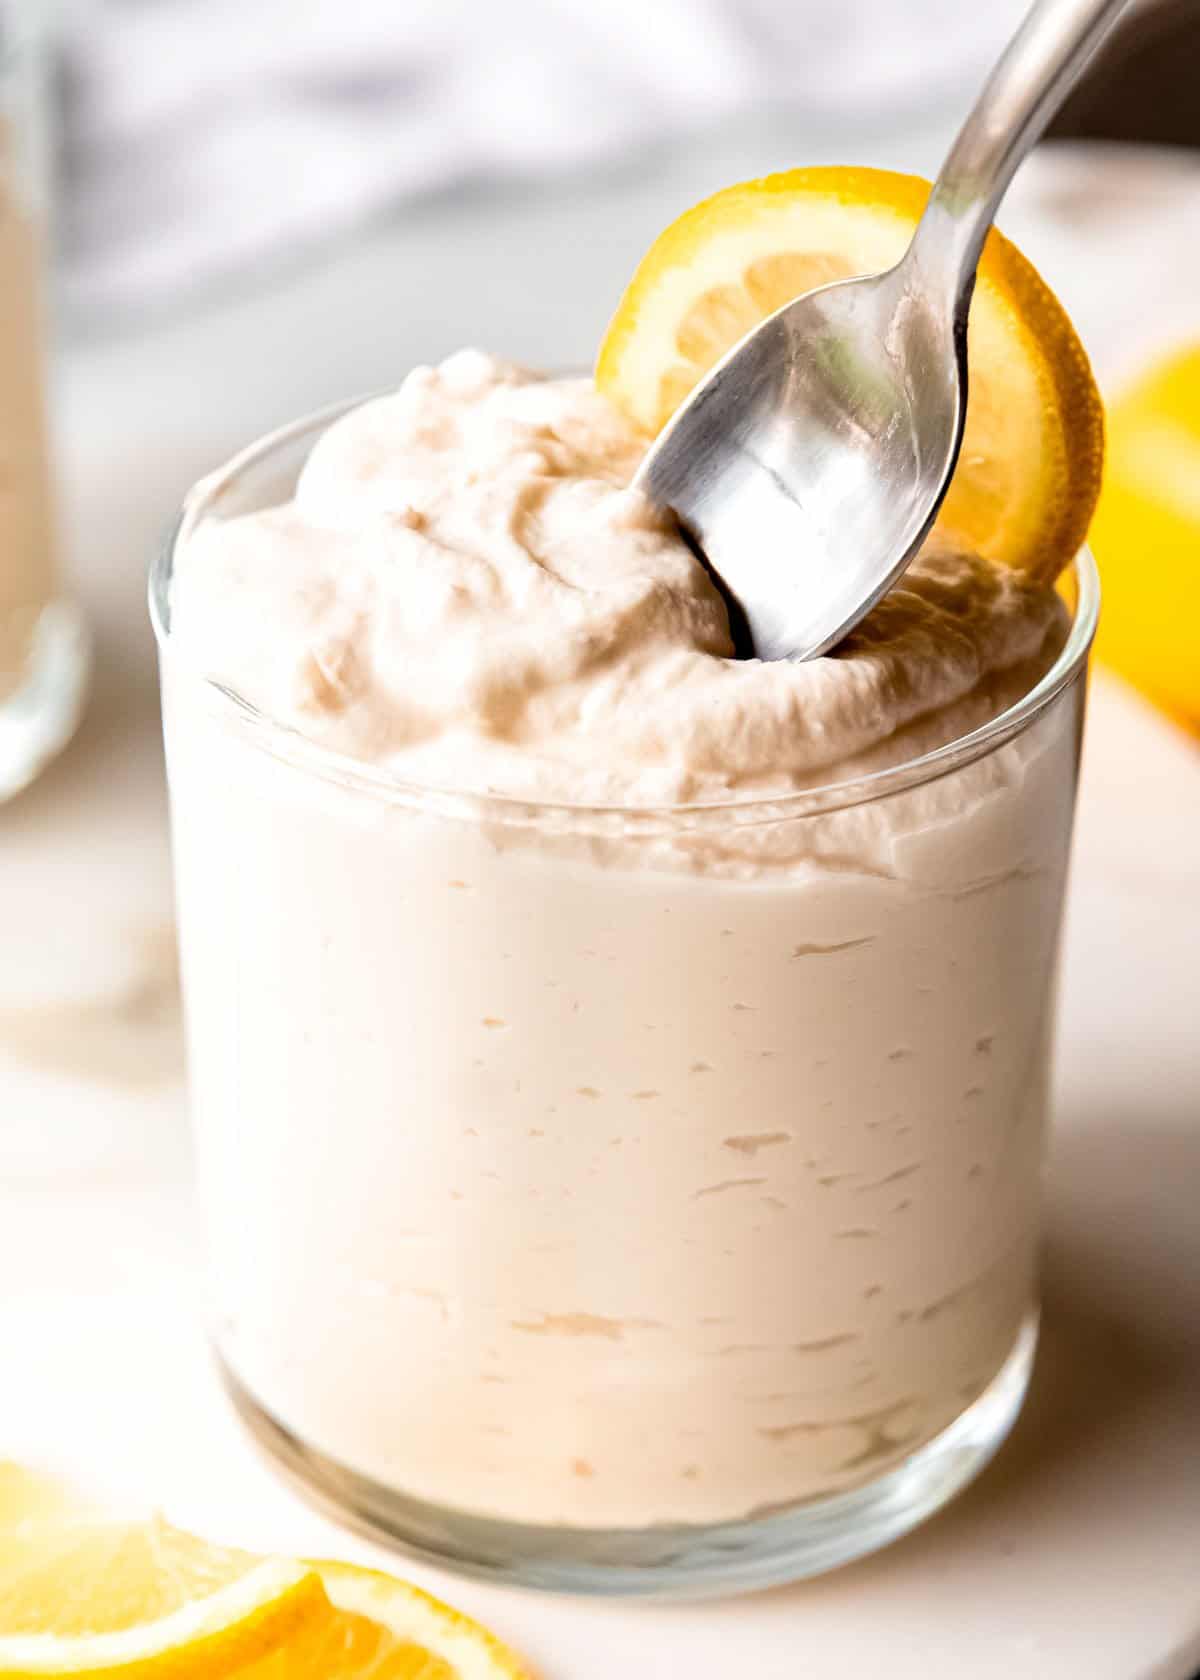 close up image of lemon mousse being spooned out of clear glass